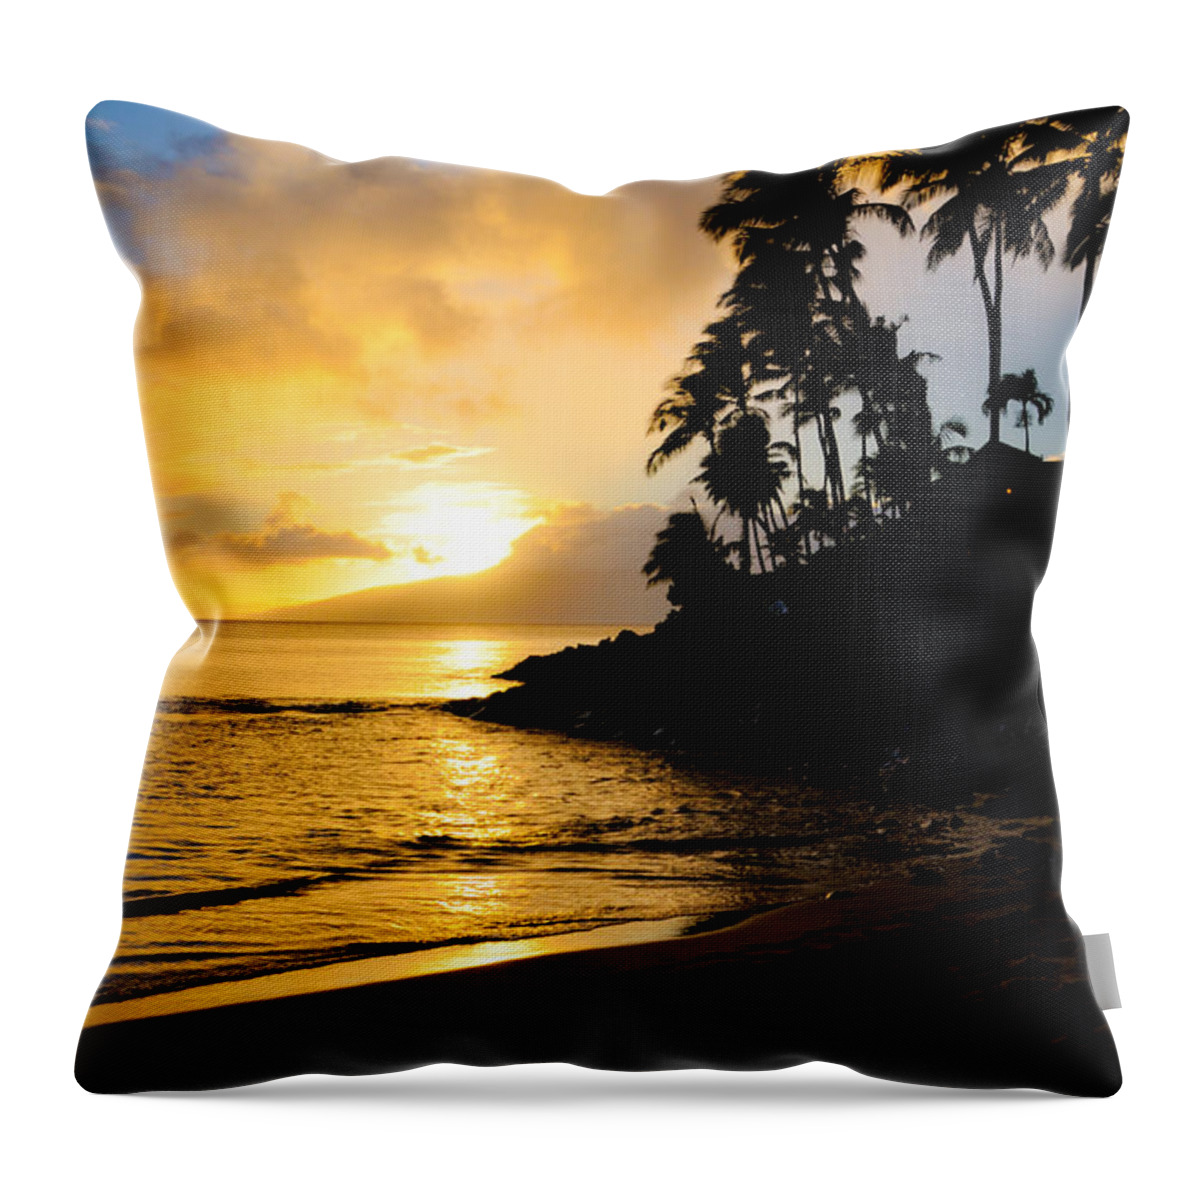 Napili Bay Throw Pillow featuring the photograph Napili Sunset Evening by Kelly Wade